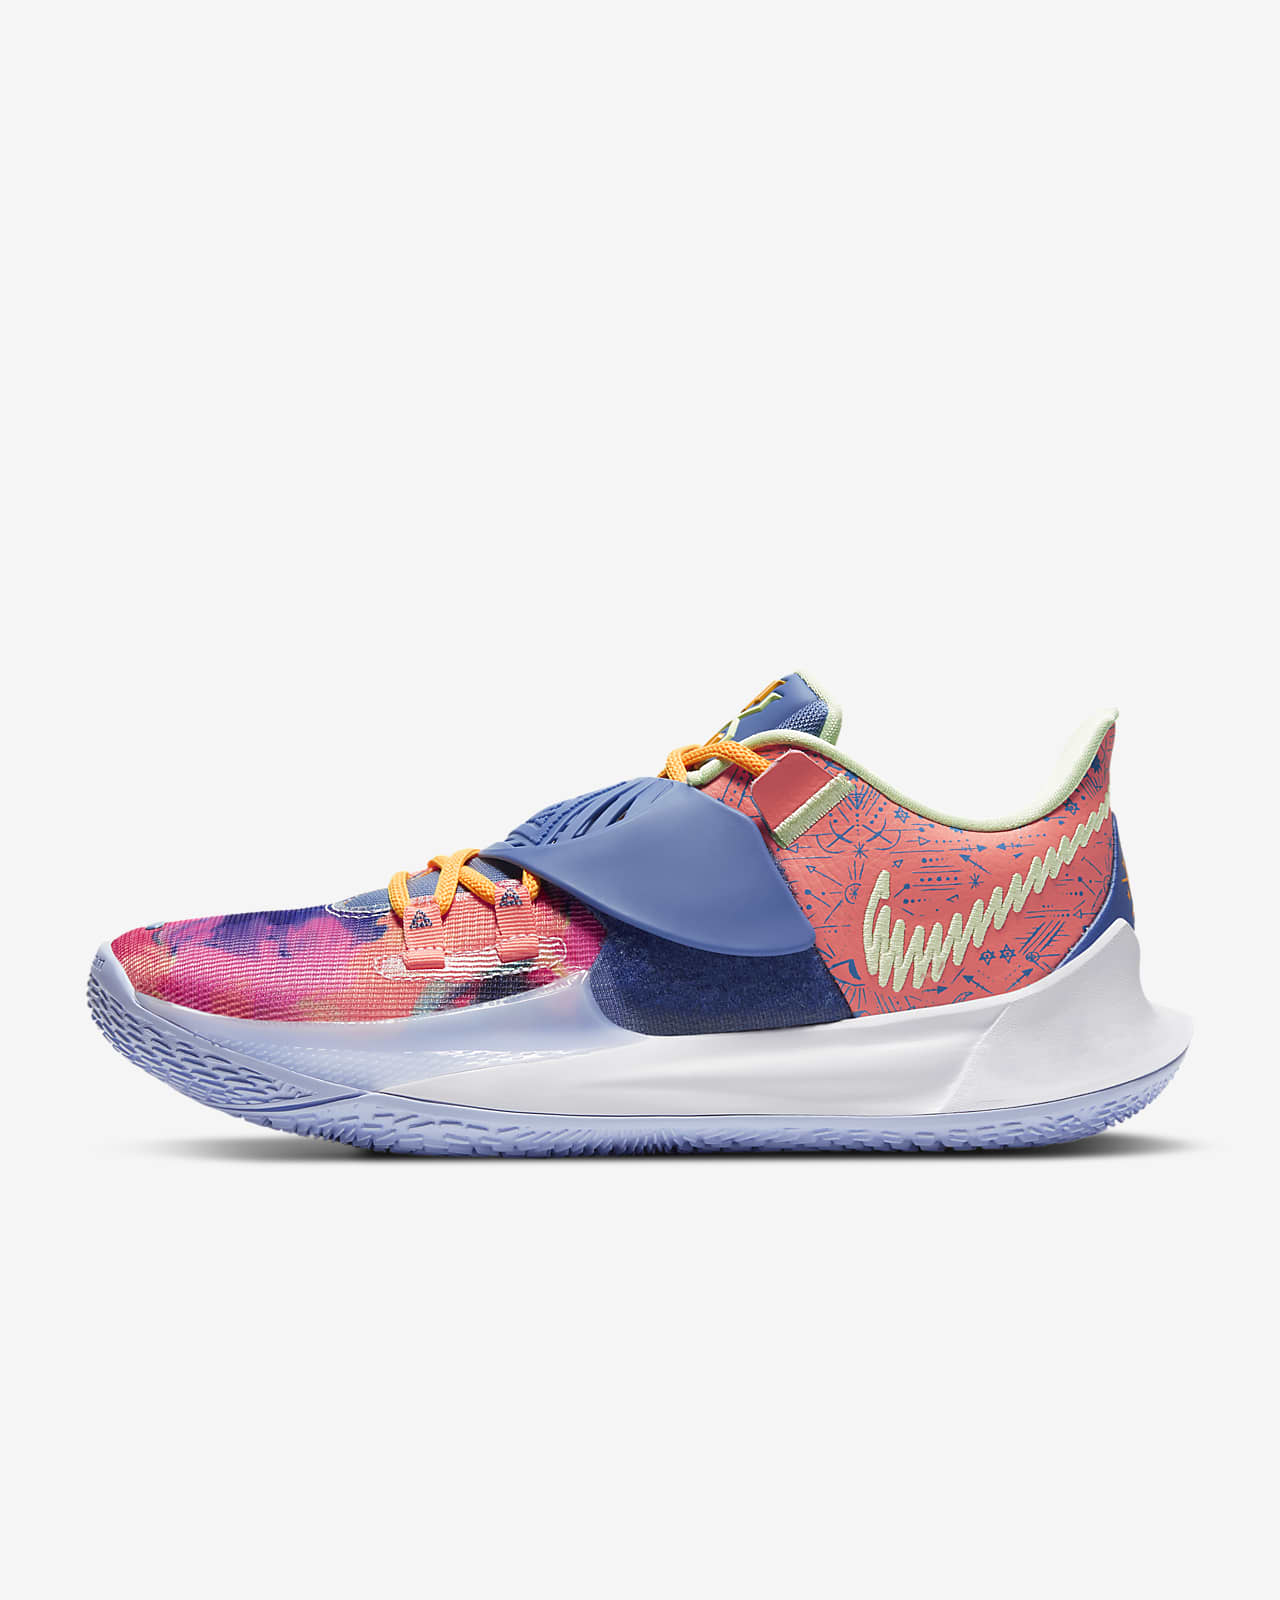 kyrie 3 womens basketball shoes